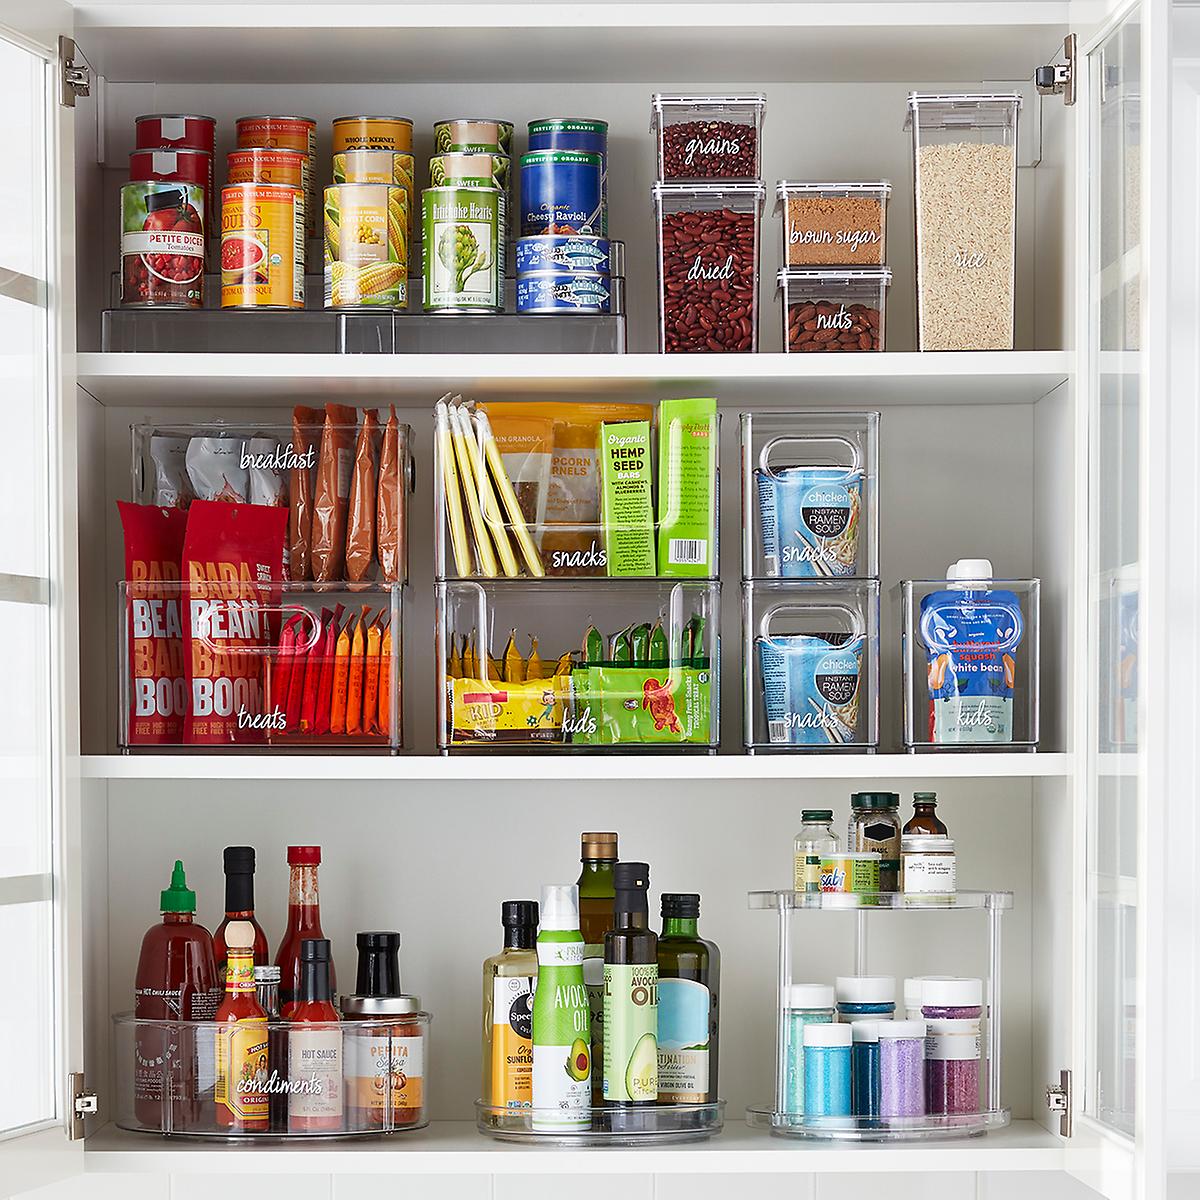 How Do You Organize Snacks in a Pantry?